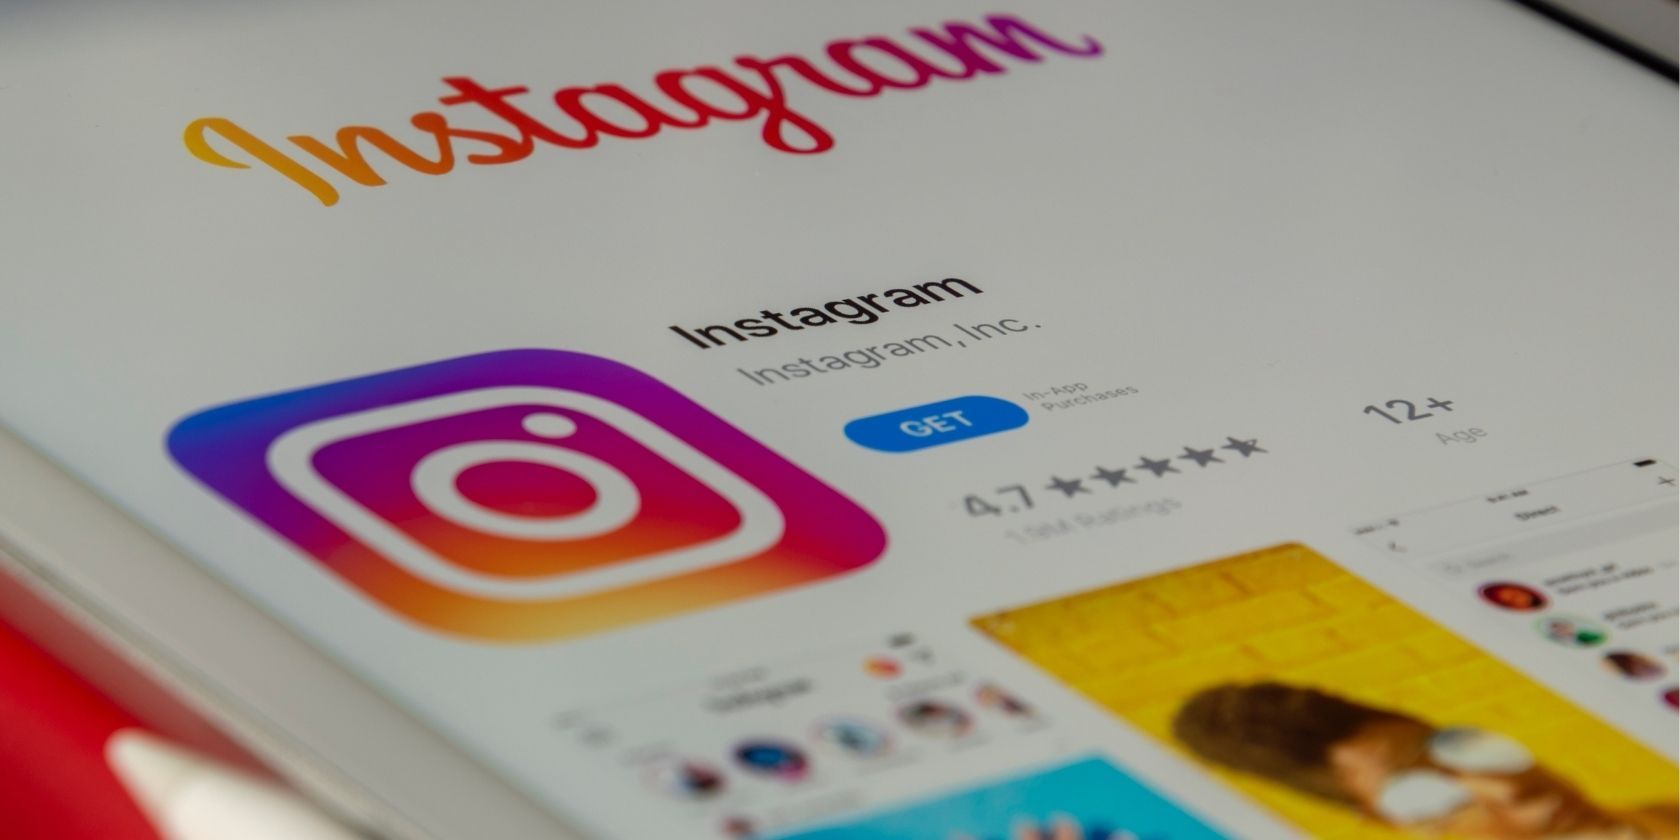 How to View and Remove Instagram Login Activity